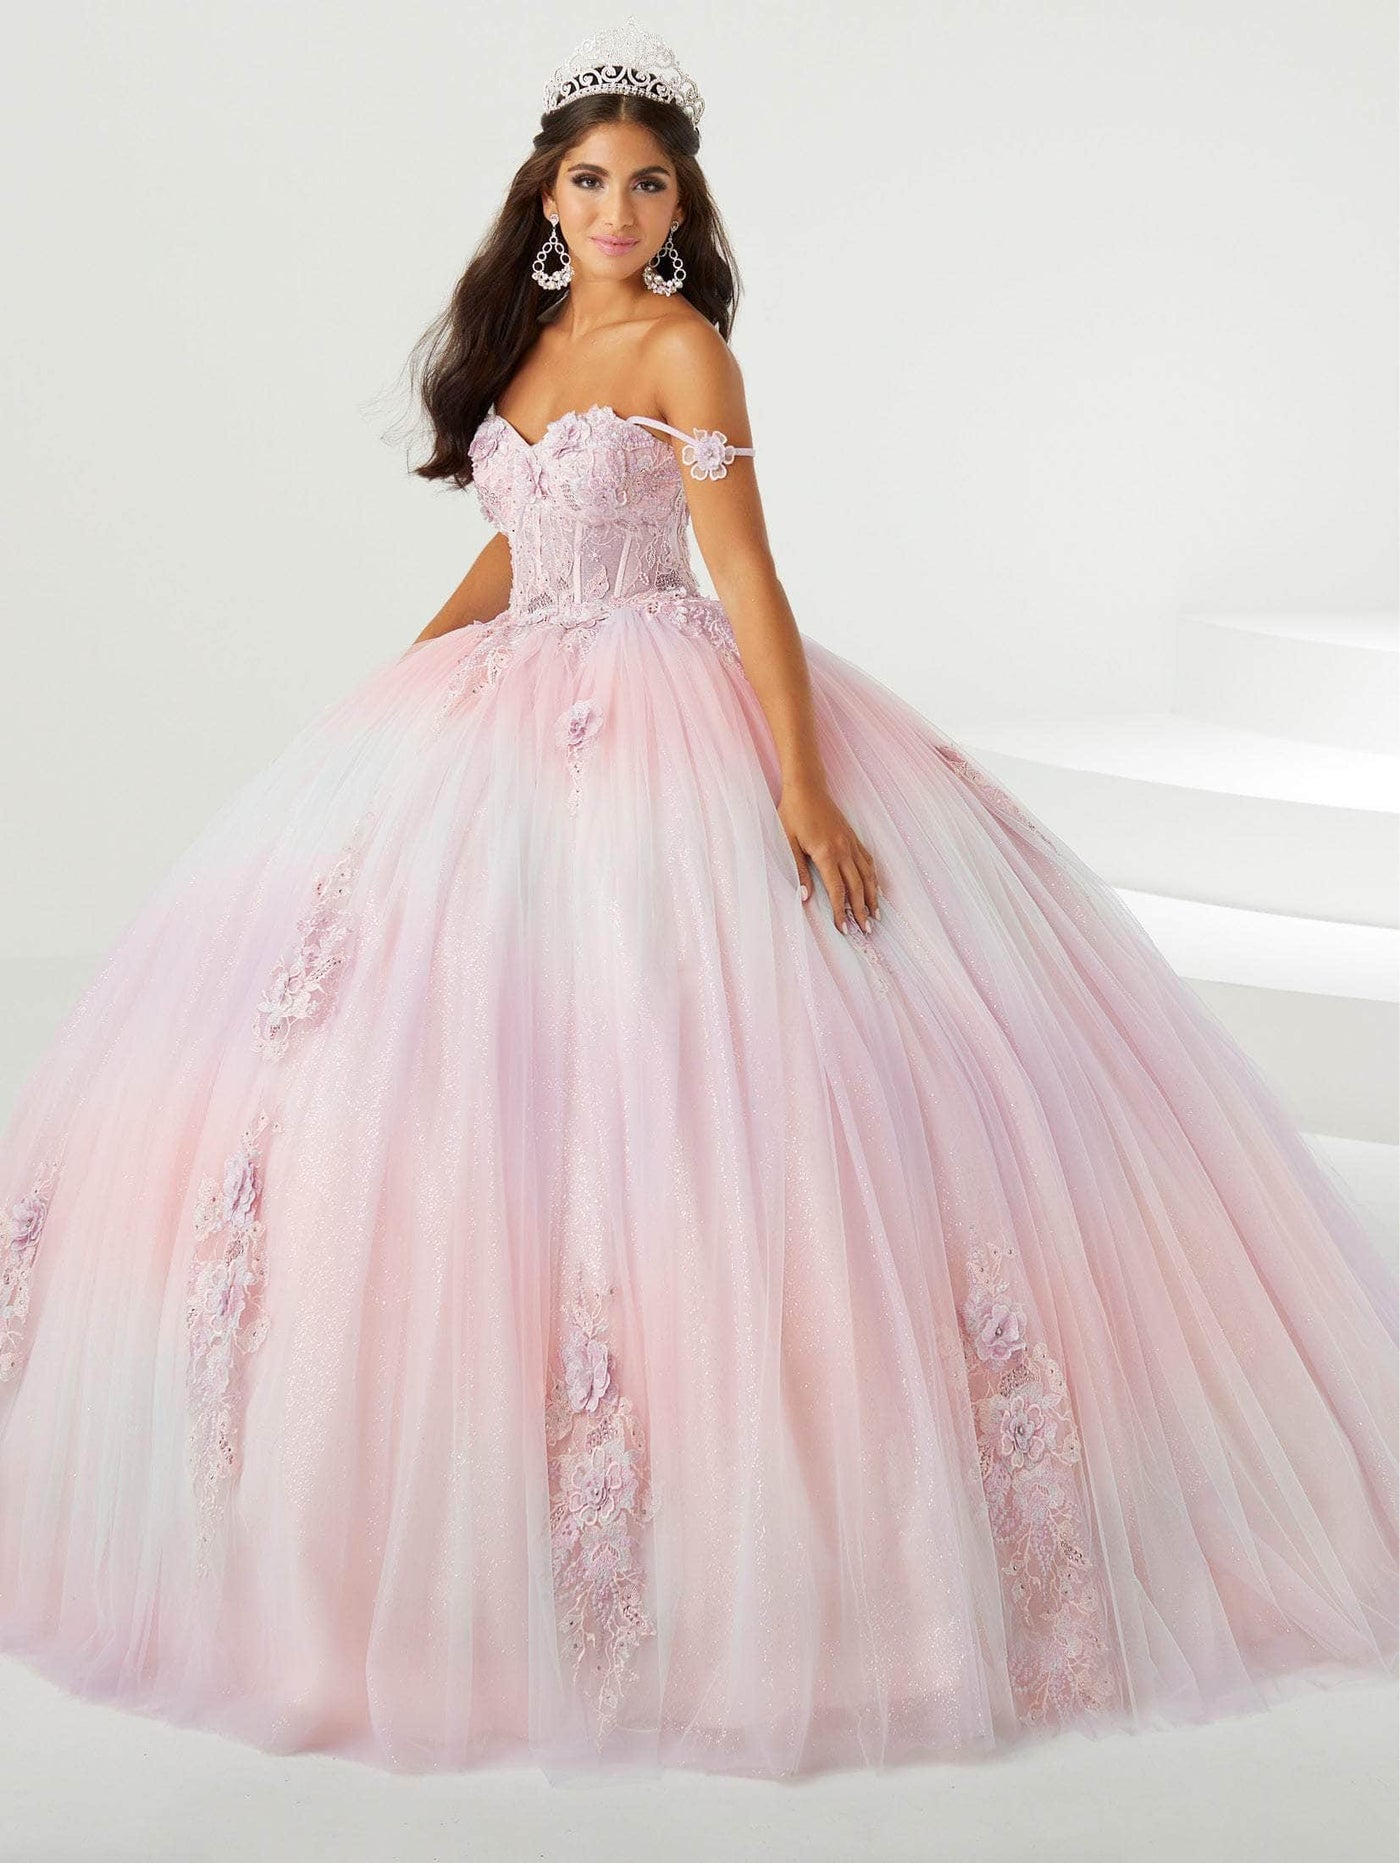 Fiesta Gowns 56469 - Thin Strapped Glittery Ball Gown Special Occasion Dress